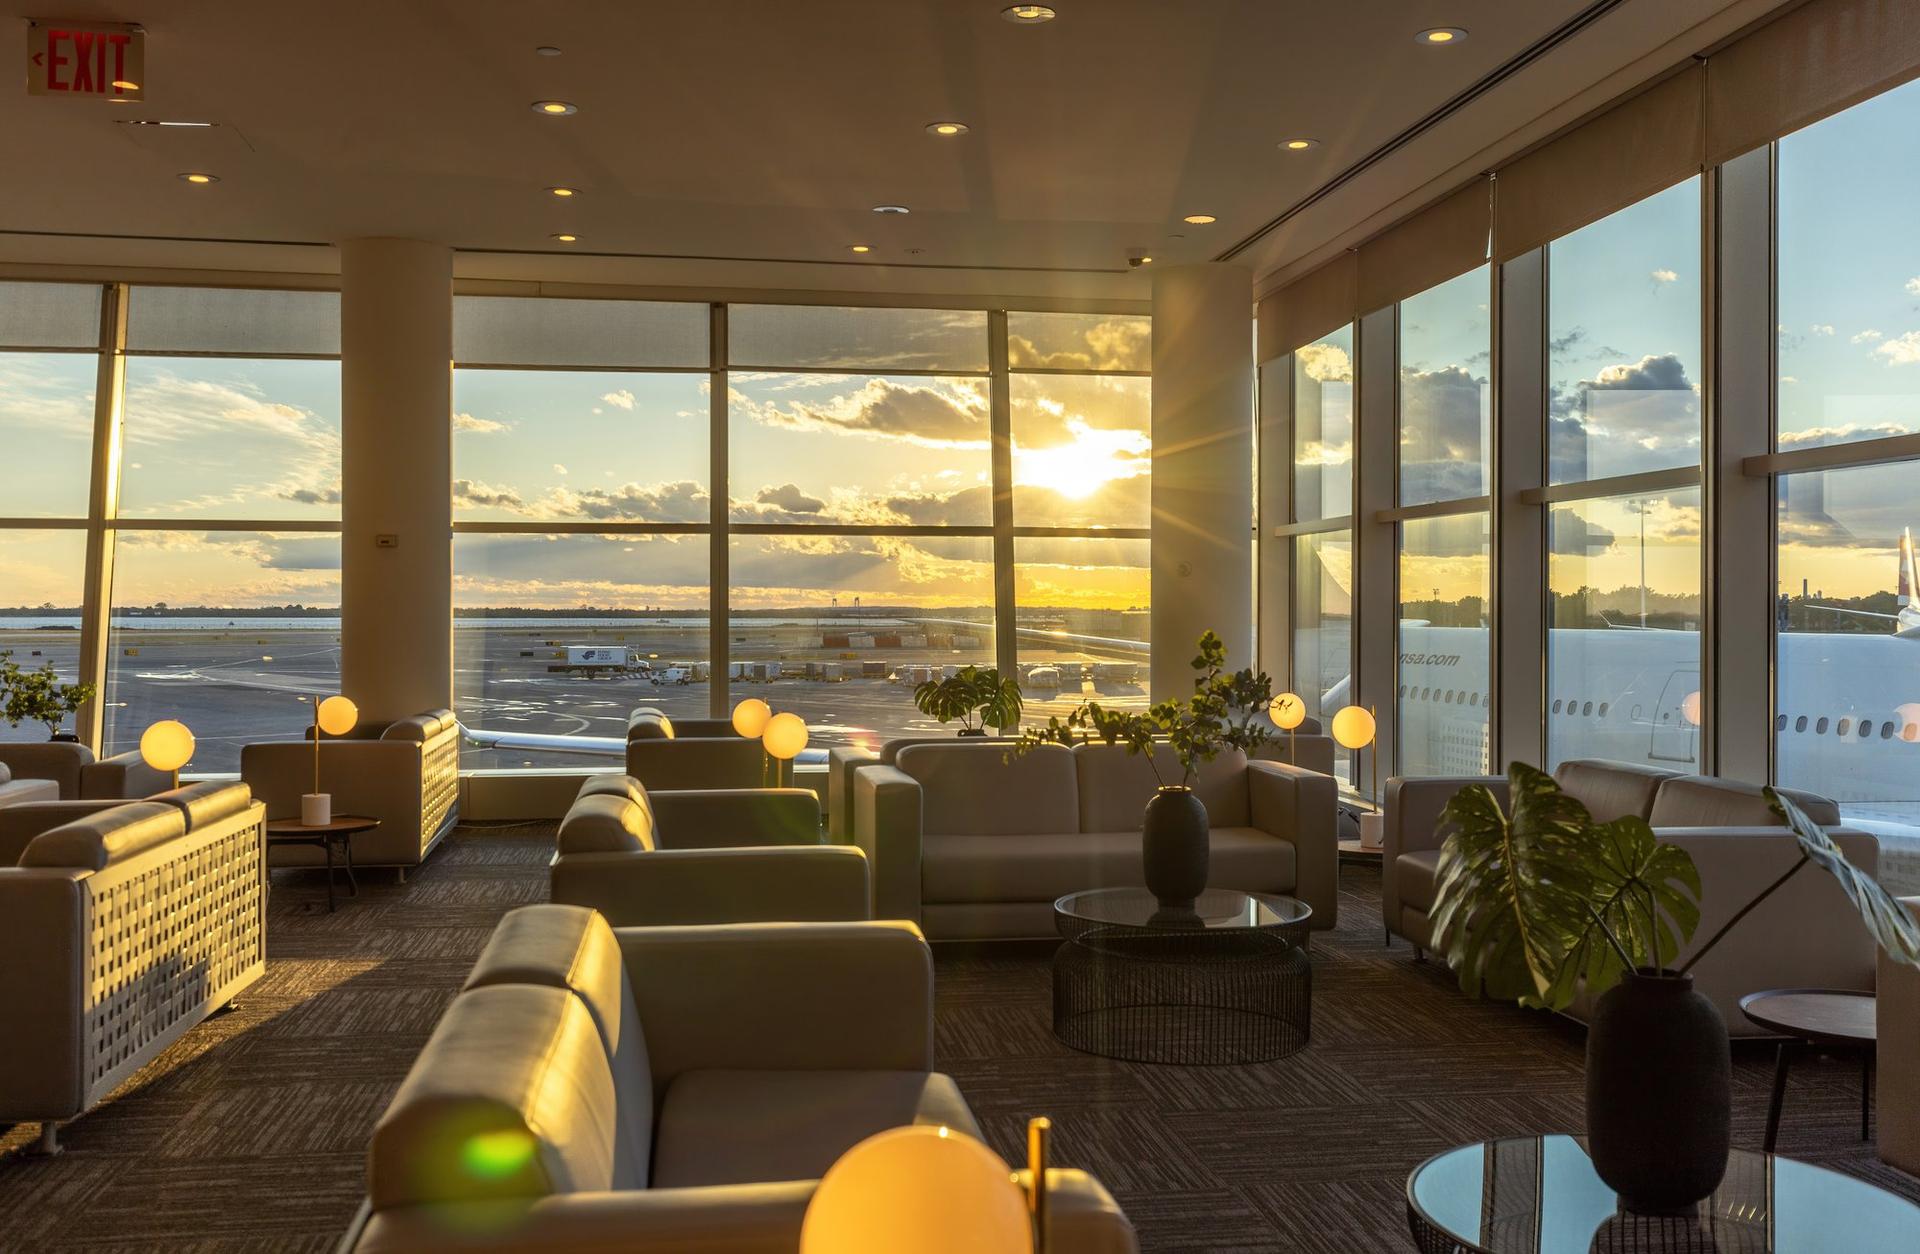 Turkish Airlines Lounge New York image 17 of 18